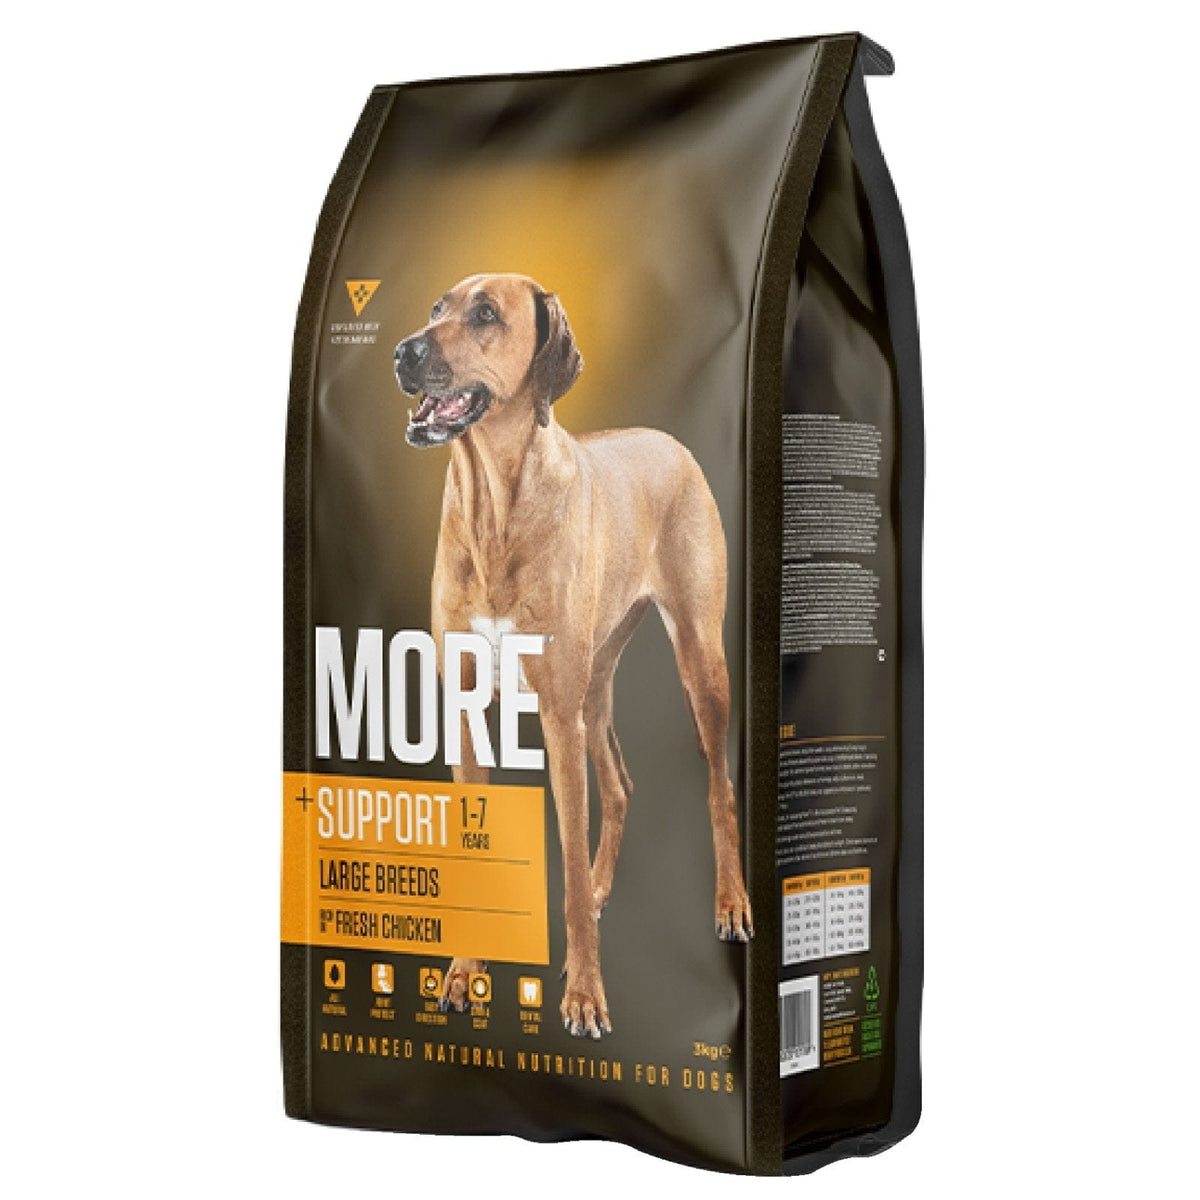 More Support Chicken Large Breeds Dry Dog Food - Walkies